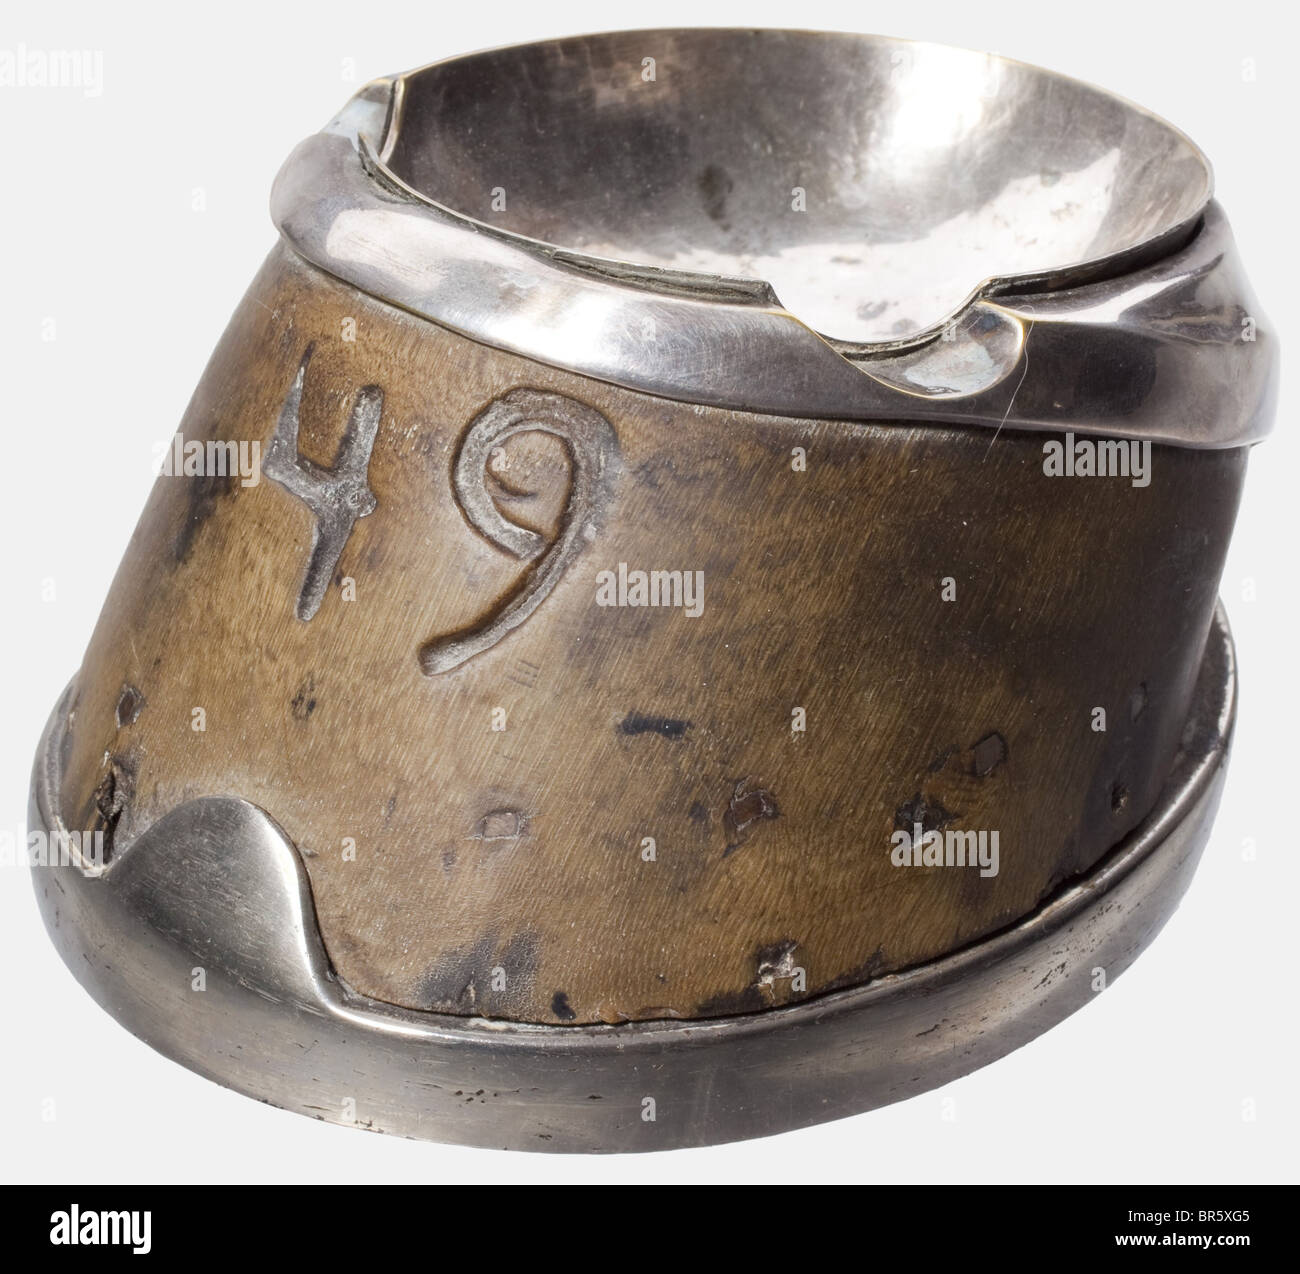 Oberleutnant Ernst Schultze-Moderow, a colonial ashtray Horn of a horse's hoof, silver-plated brass and nickel-plated steel horseshoe. The number '49' is deeply carved into the horn. Height circa 7 cm. According to the family's tradition it is made from the hoof of his horse during his time in South West Africa. historic, historical, 1900s, 1910s, 20th century, navy, naval forces, military, militaria, branch of service, branches of service, armed forces, armed service, object, objects, stills, clipping, clippings, cut out, cut-out, cut-outs, utensil, piece of e, Stock Photo